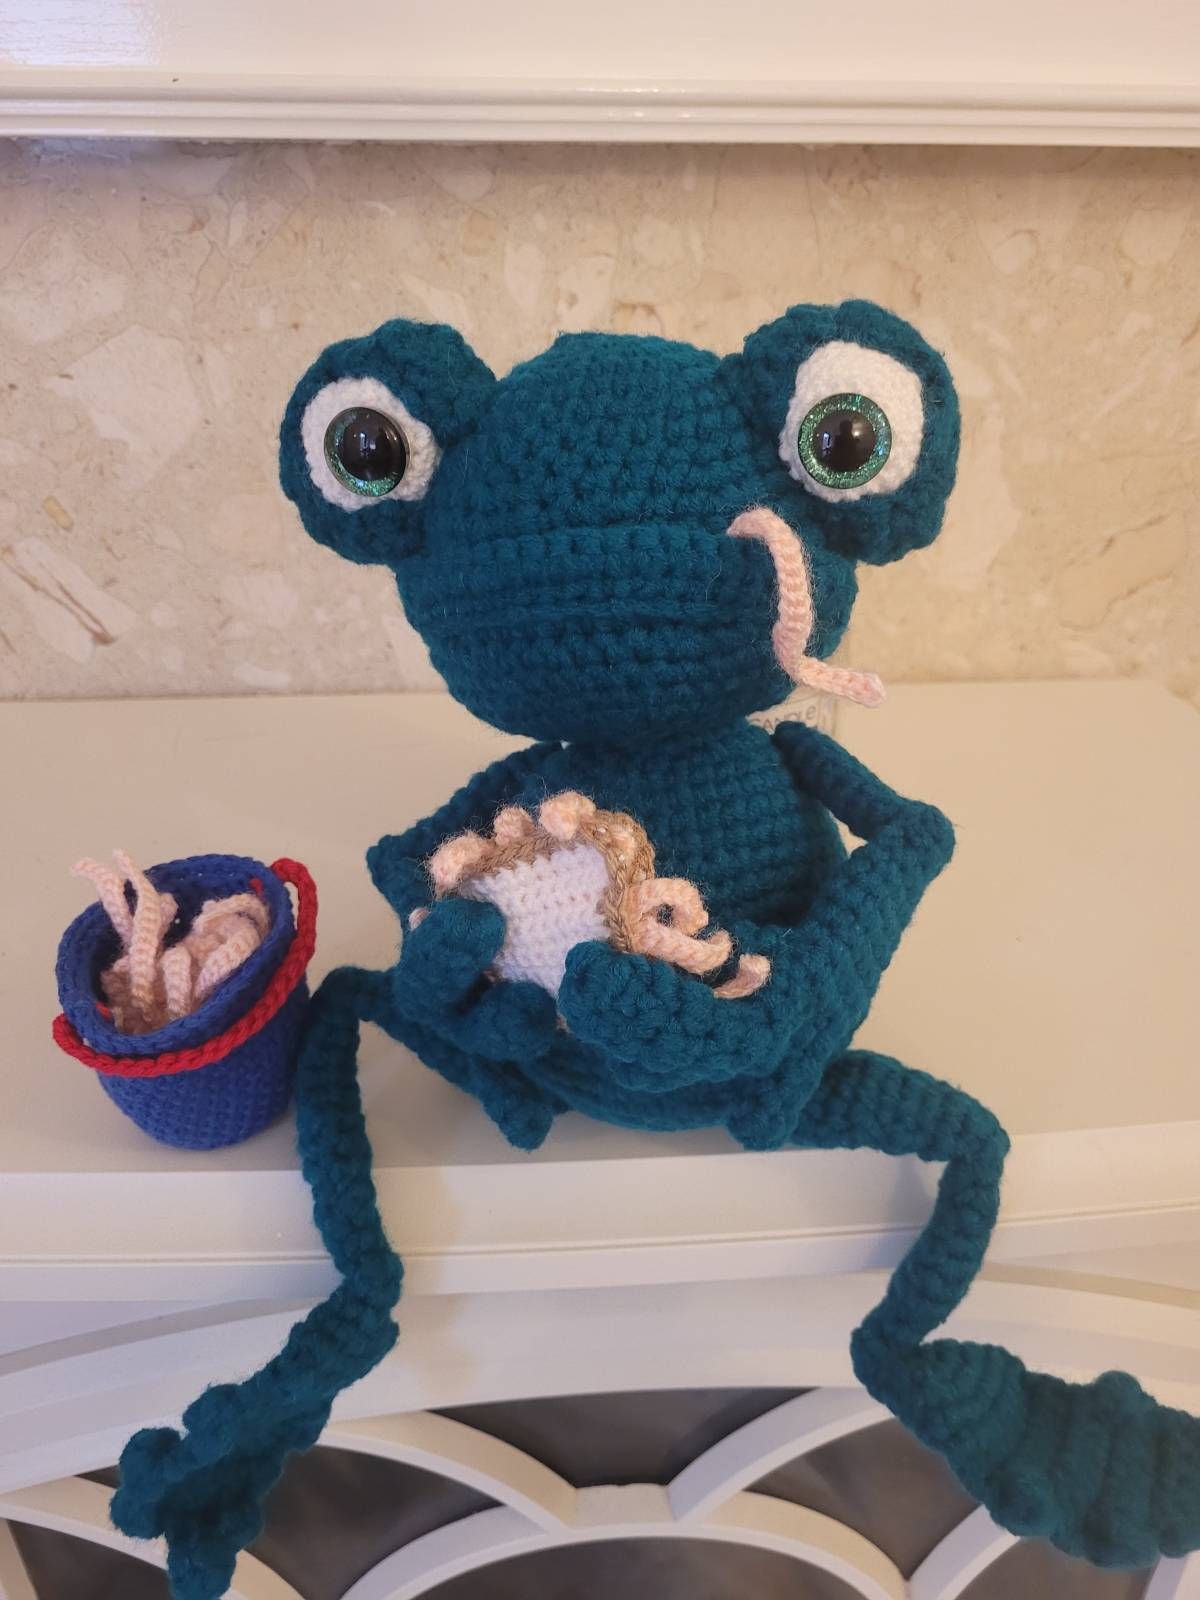 Zit the hungry frog doll photo review